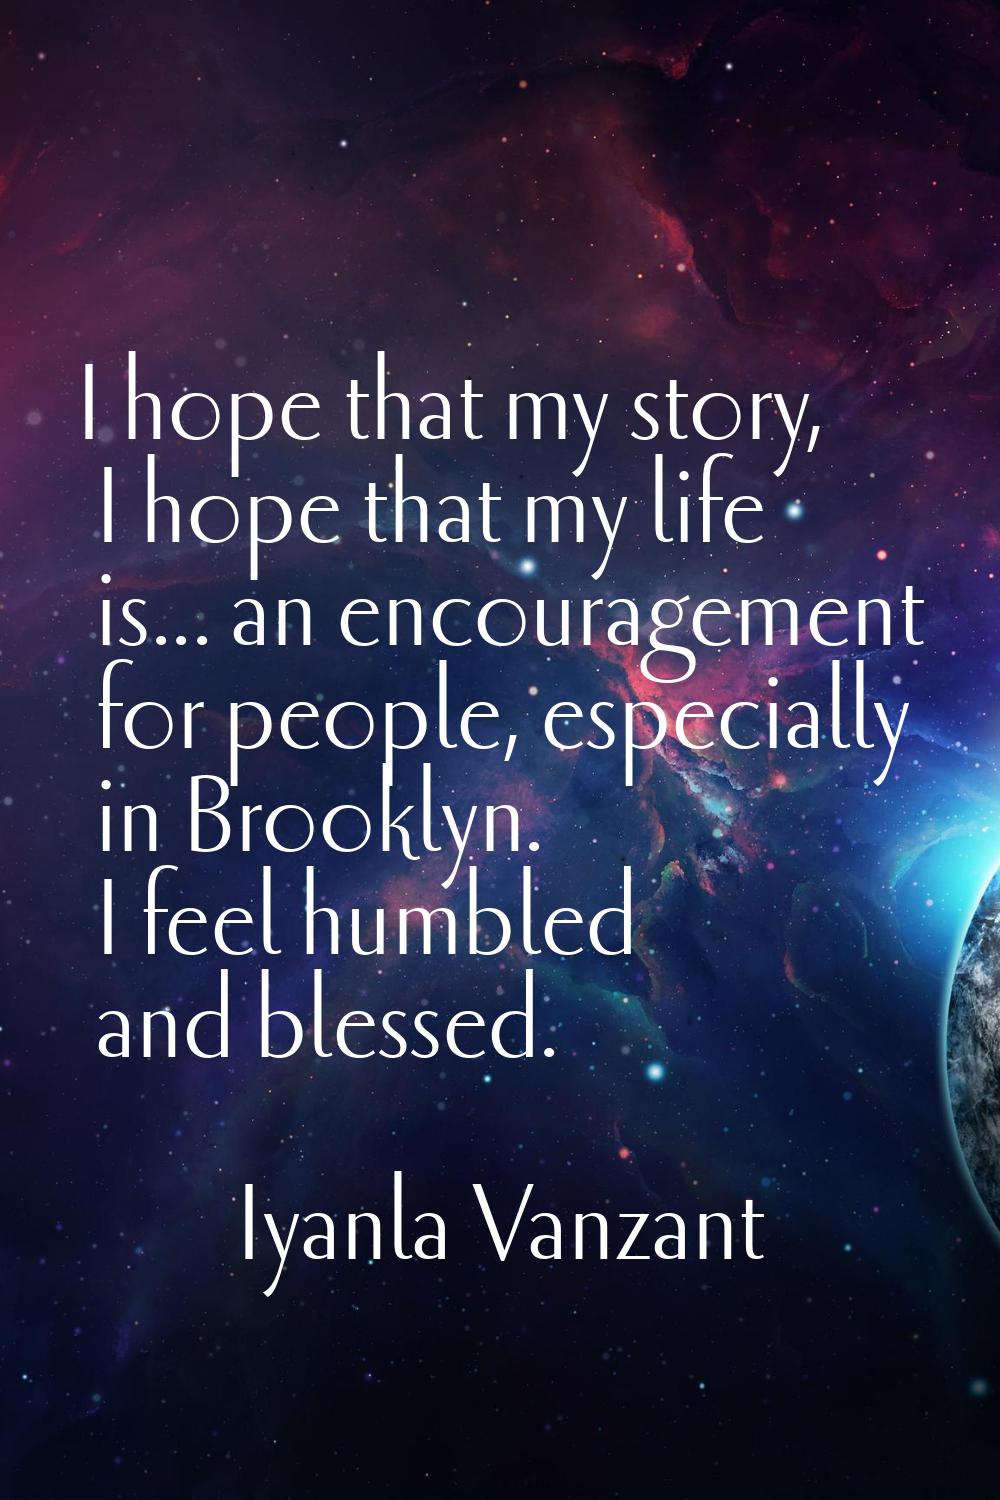 I hope that my story, I hope that my life is... an encouragement for people, especially in Brooklyn